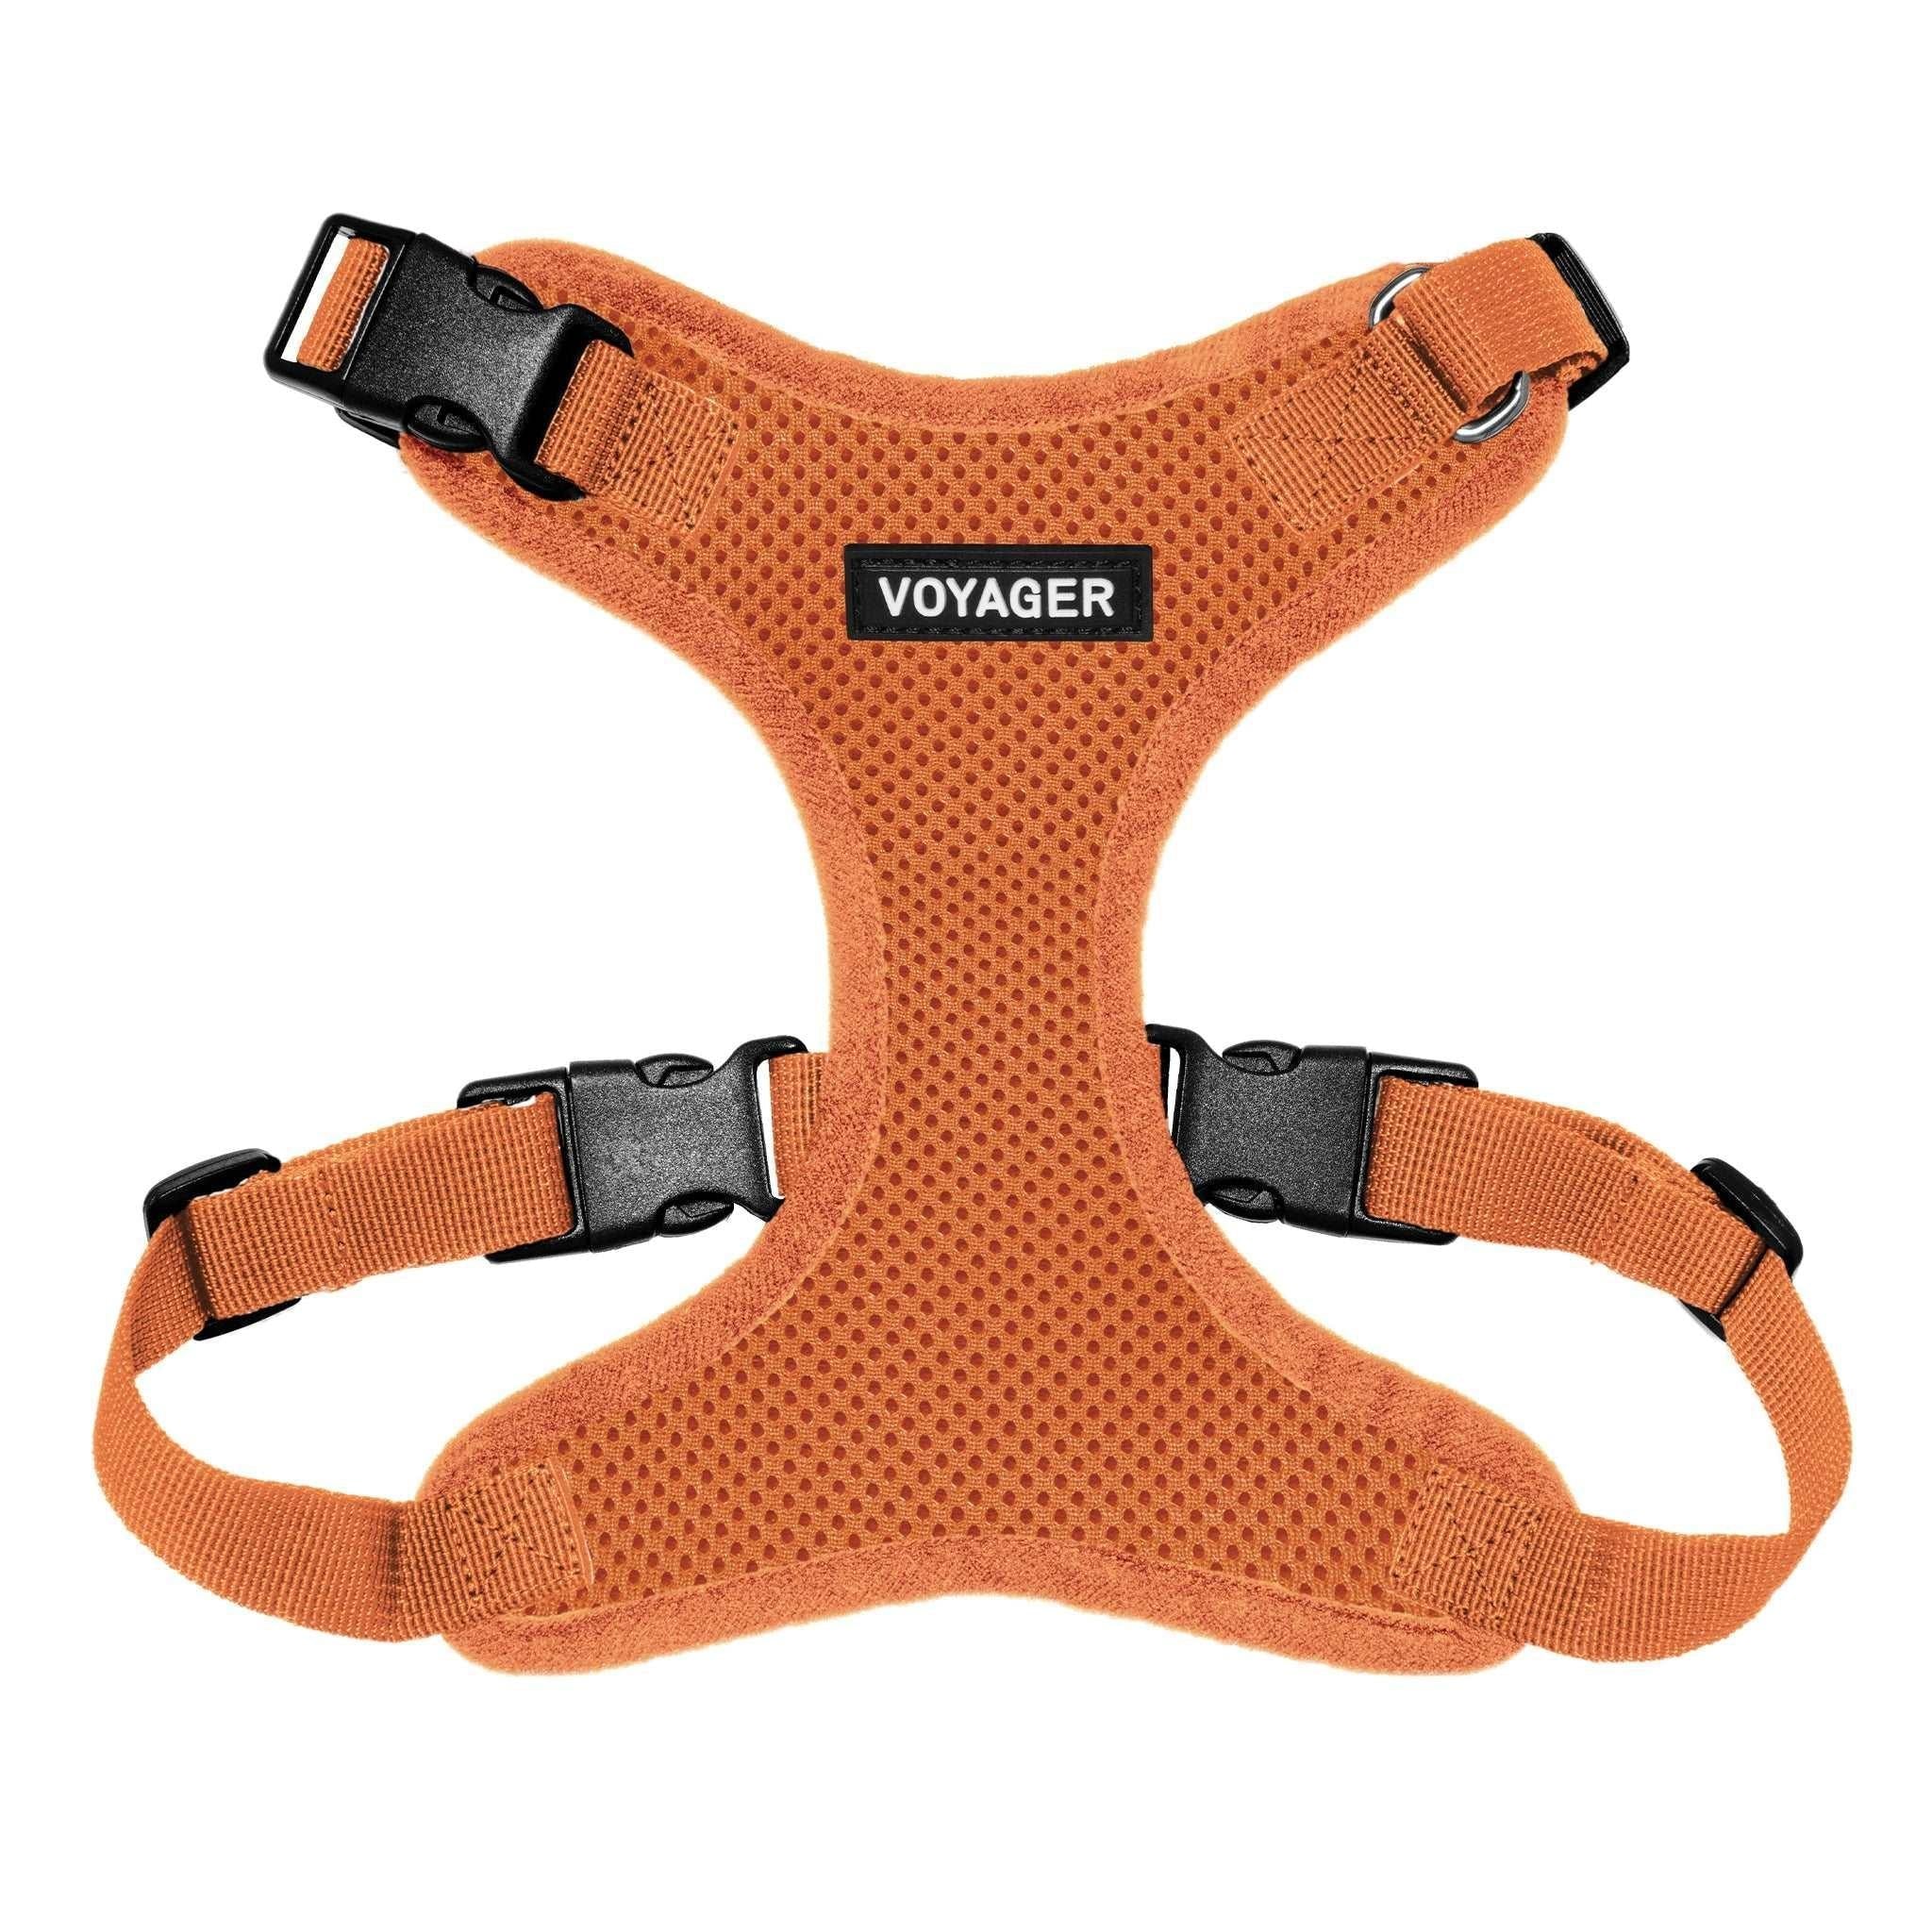 VOYAGER Step-In Lock Dog Harness in Orange with Matching Trim and Webbing - Front